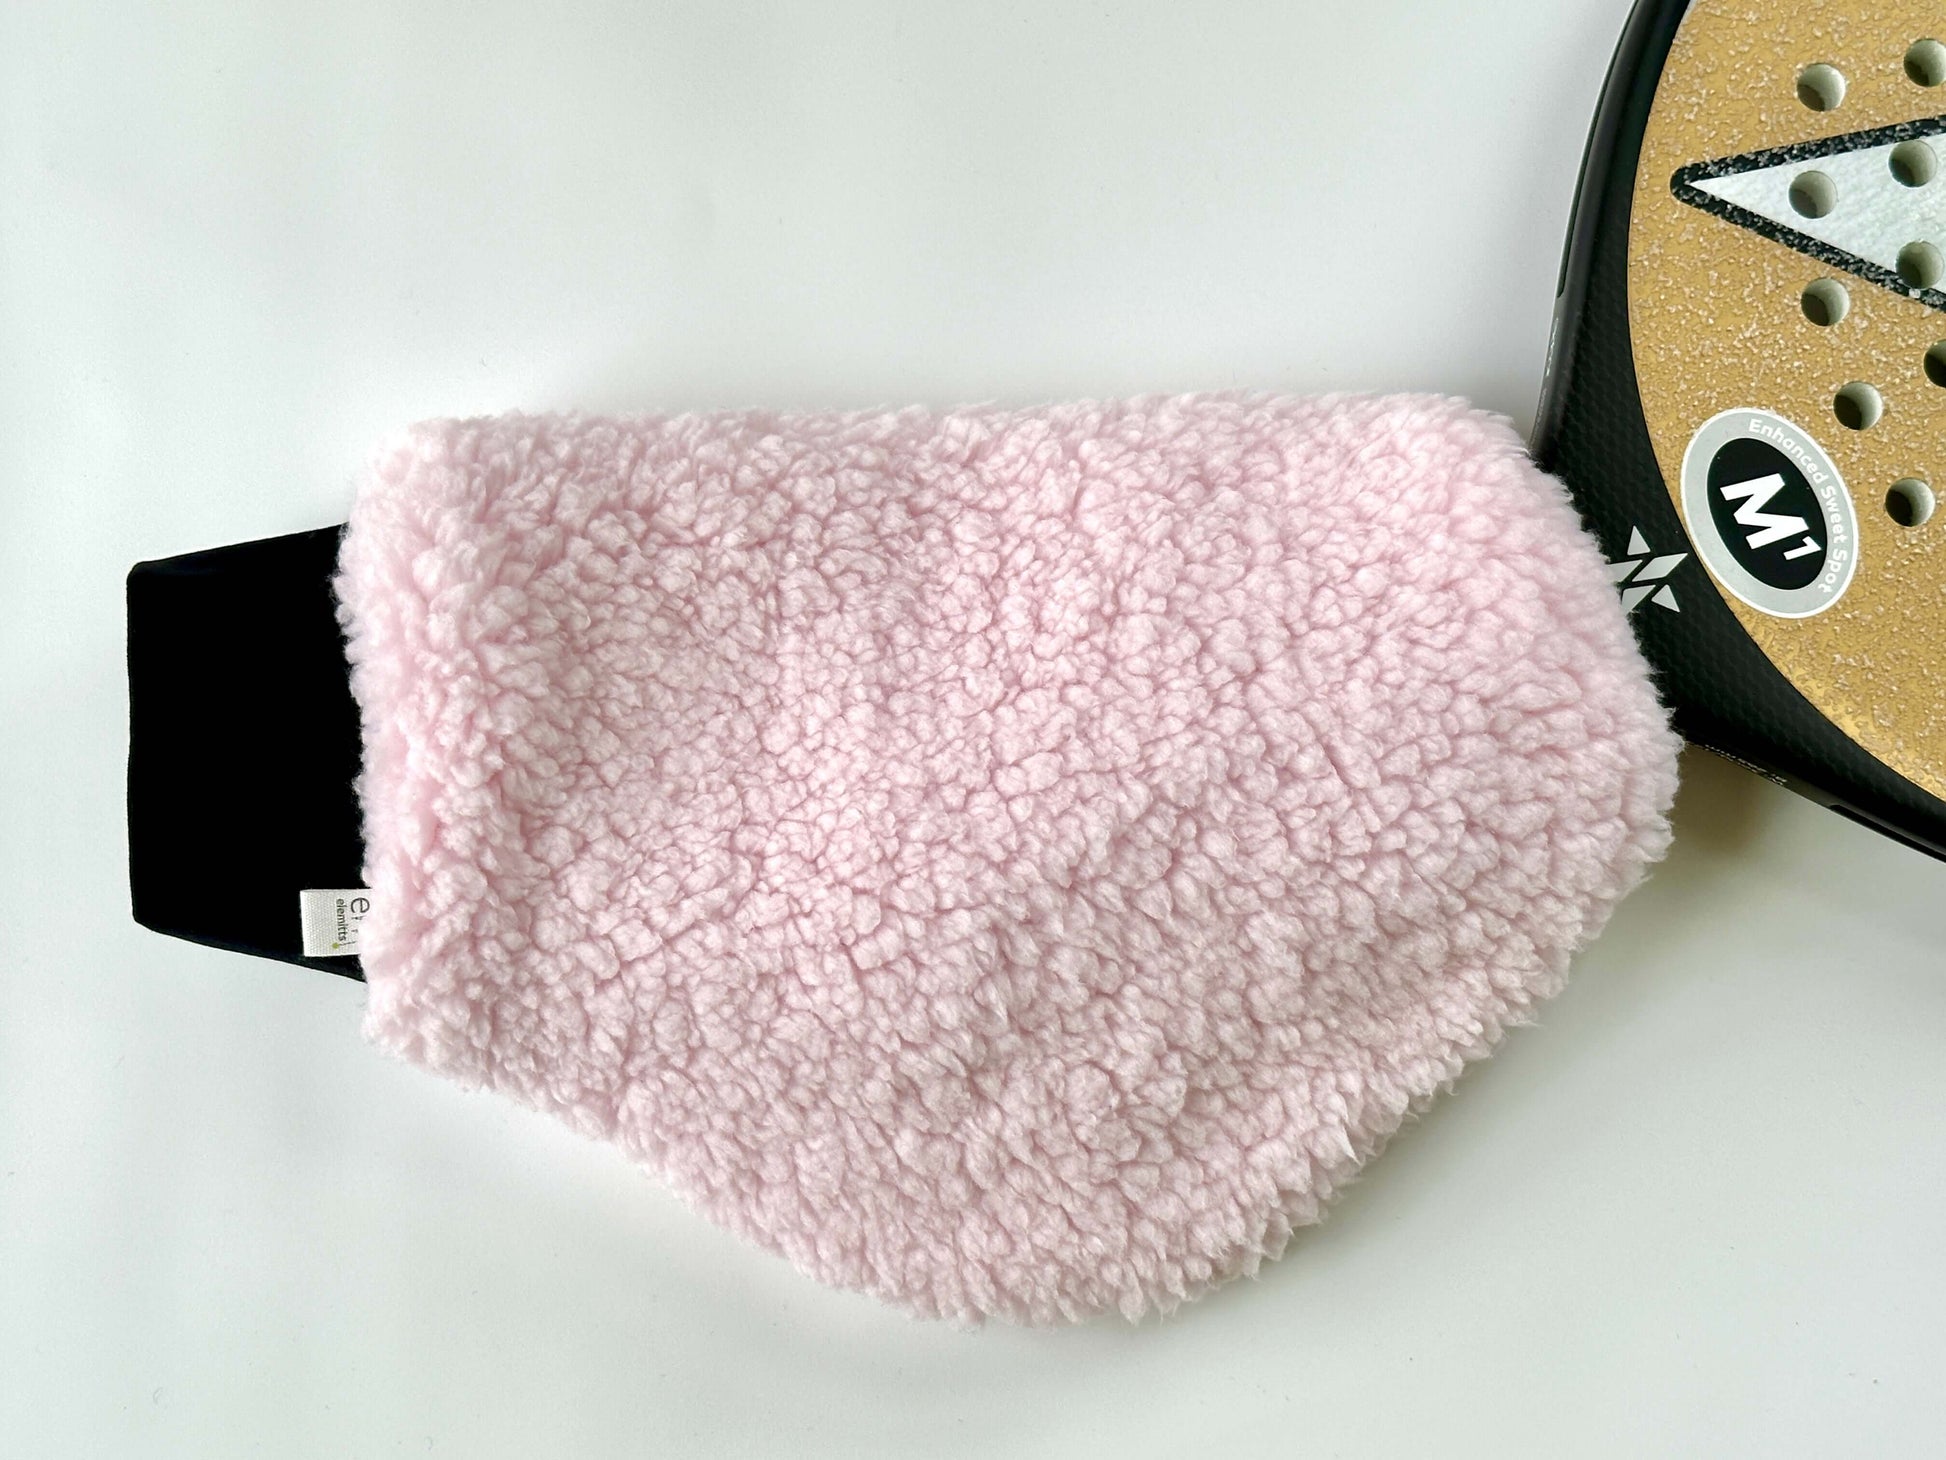 Elemitts Handmade platform tennis mitts lined with repurposed cashmere Paddle tennis